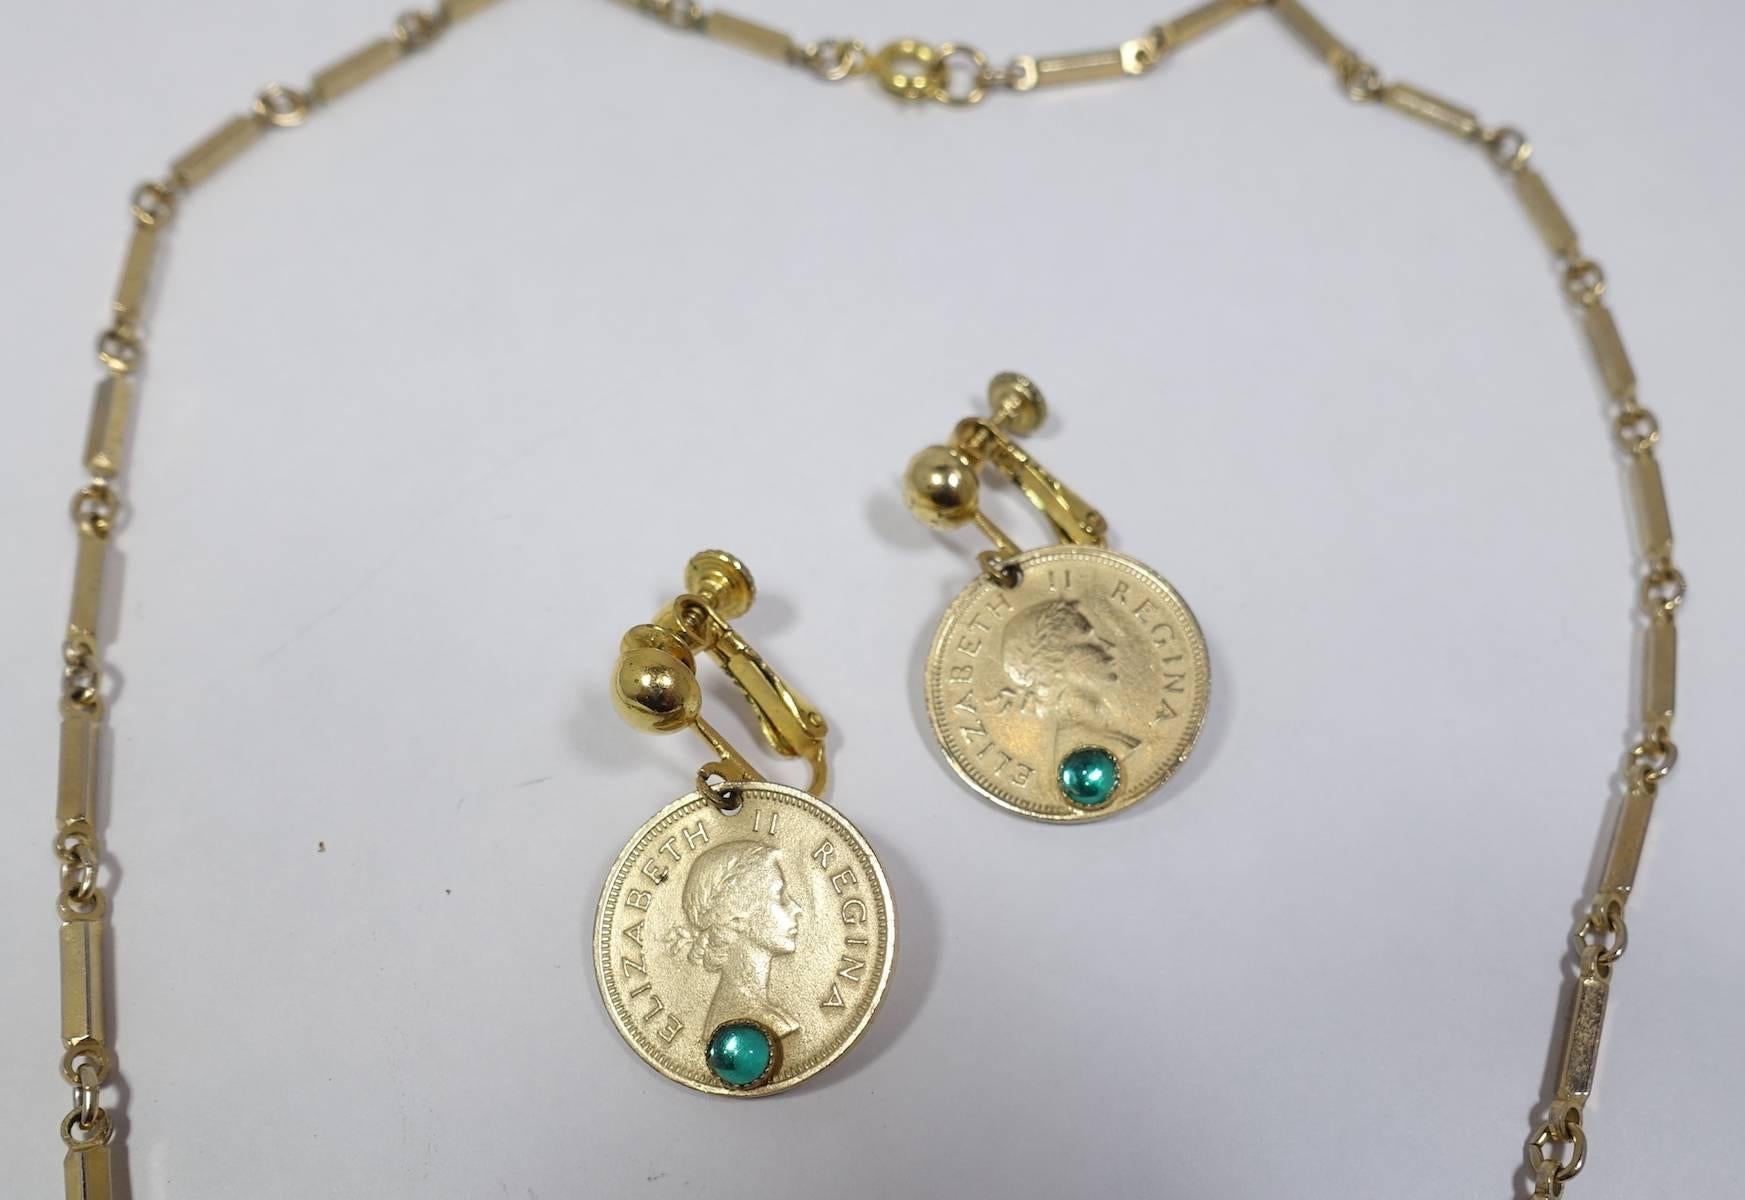 Women's or Men's Vintage South African Faux Coins Necklace & Earrings